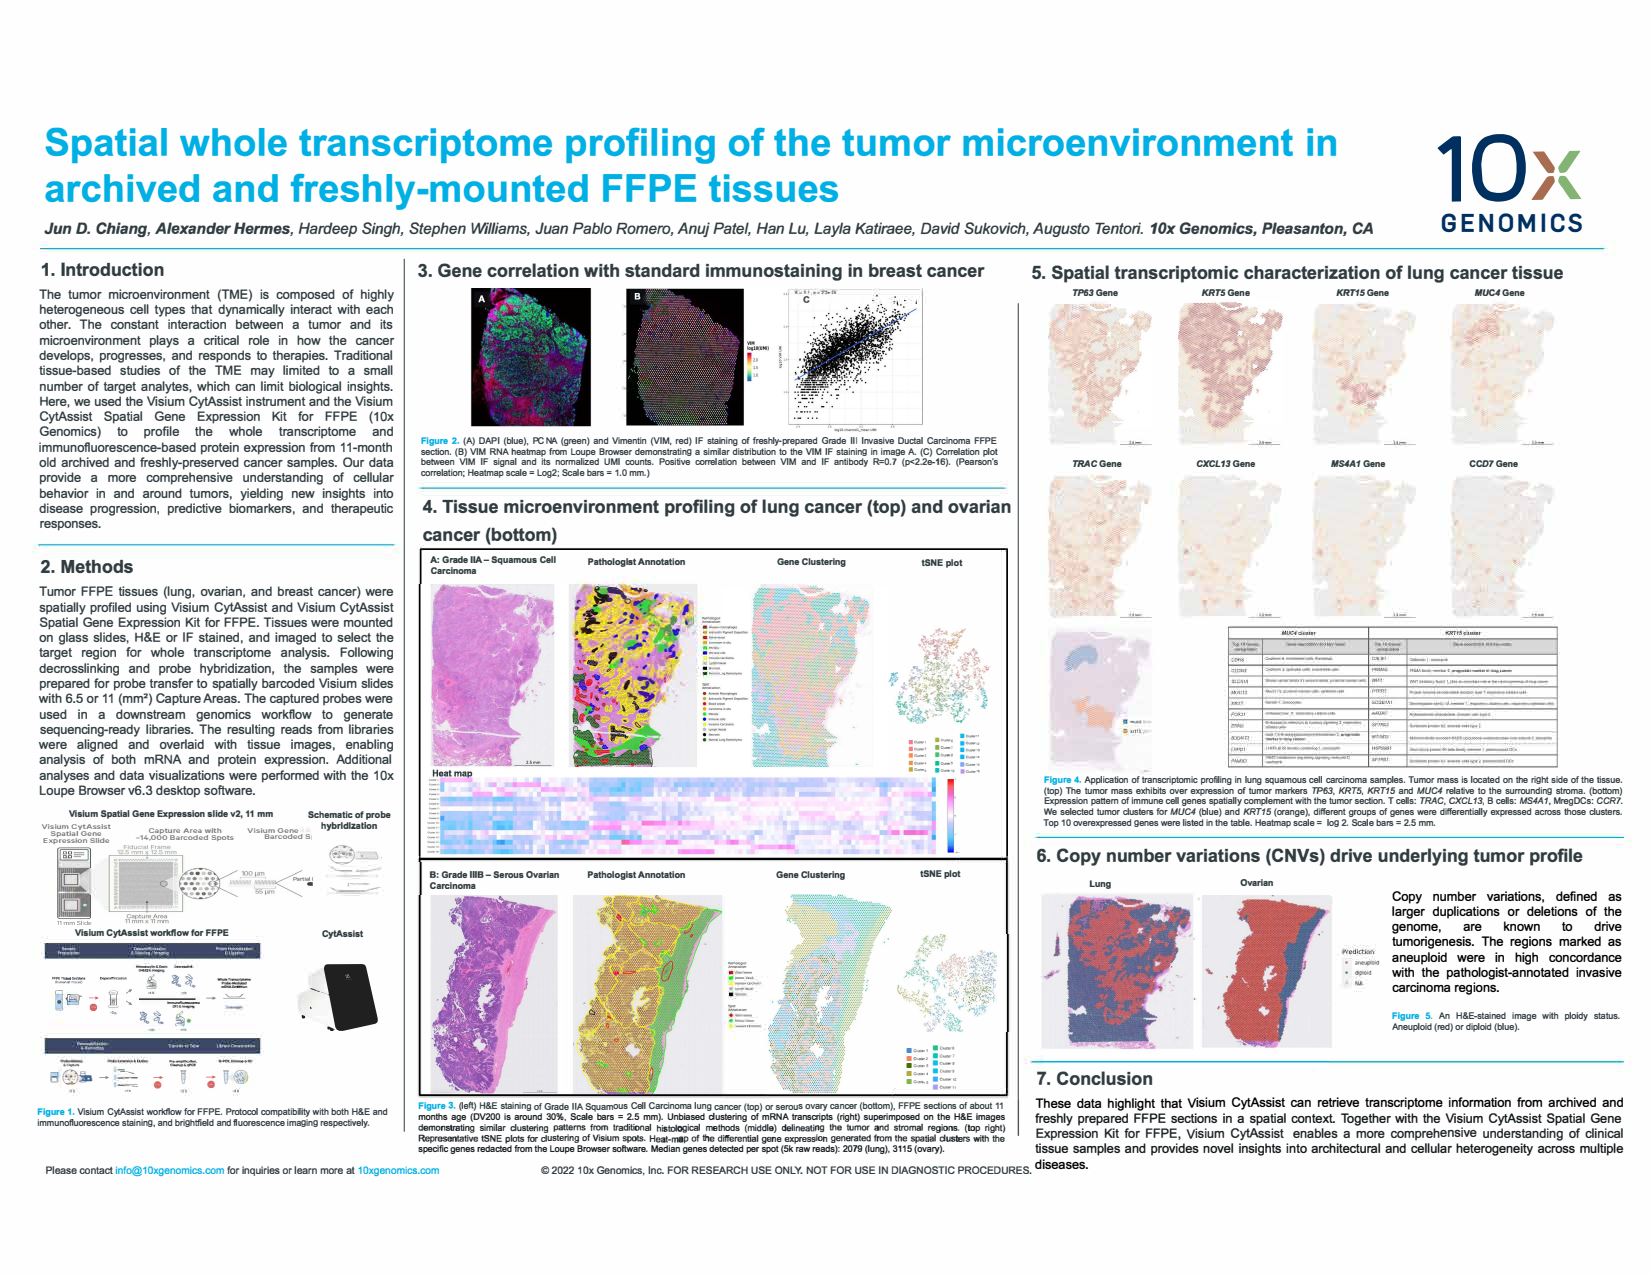 Spatial whole transcriptome profiling of the tumor microenvironment in archived and freshly-mounted FFPE tissues